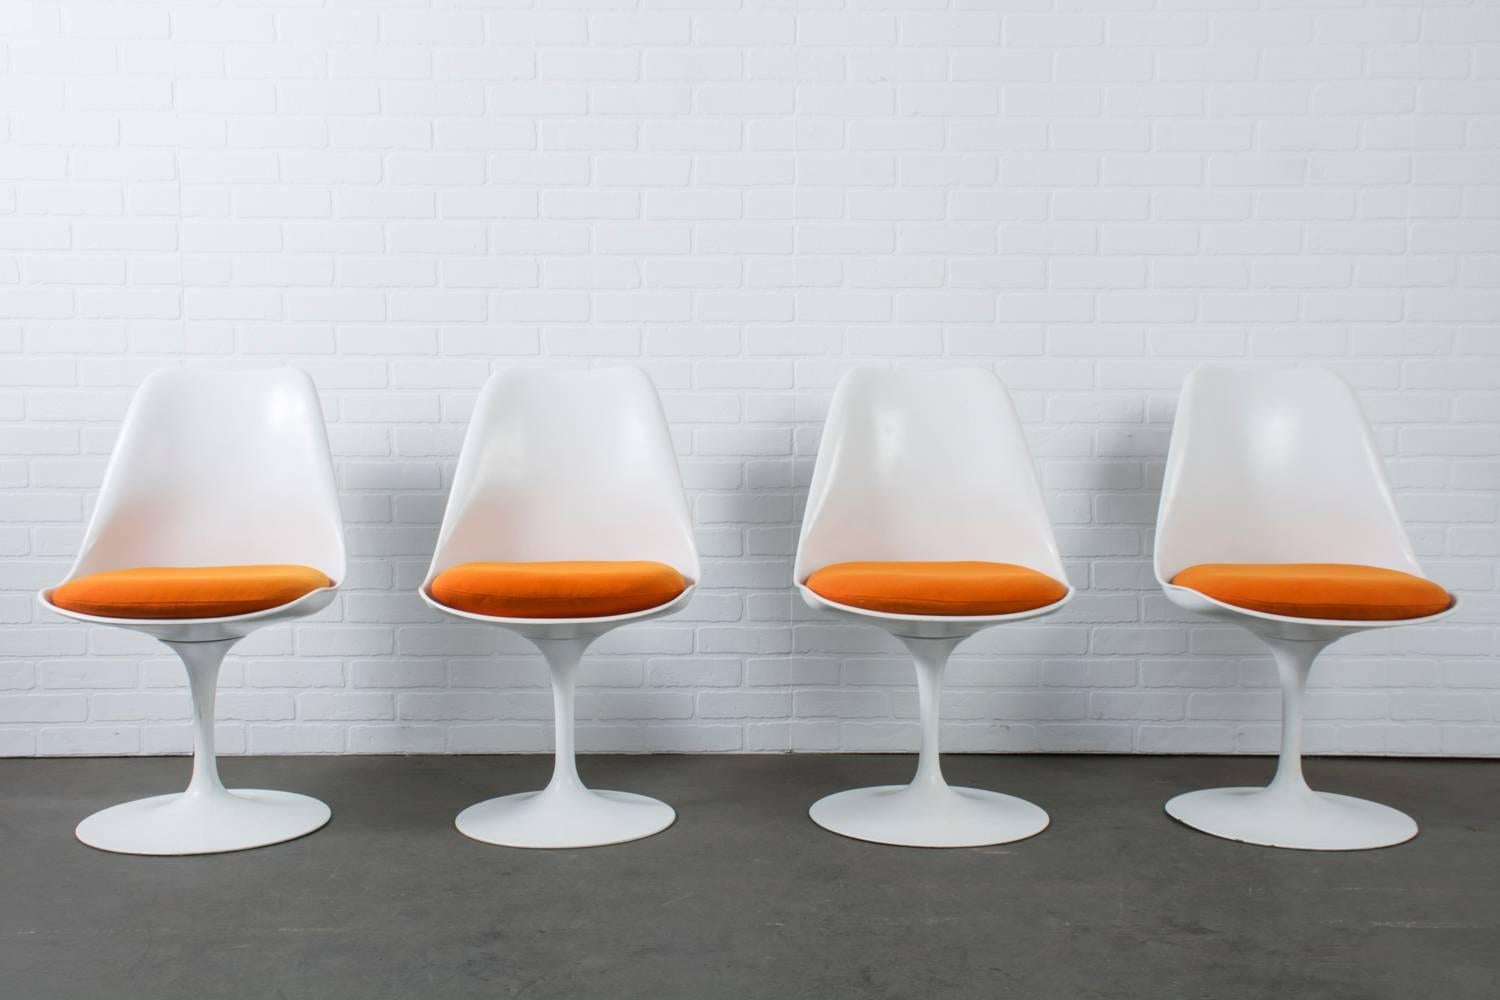 This is a set of four vintage Mid-Century Modern swivel tulip chairs designed by Eero Saarinen for Knoll in 1957.  They feature cast aluminum bases, molded fiberglass seat shells, and the original orange cushions.  Oval dining table and armchairs